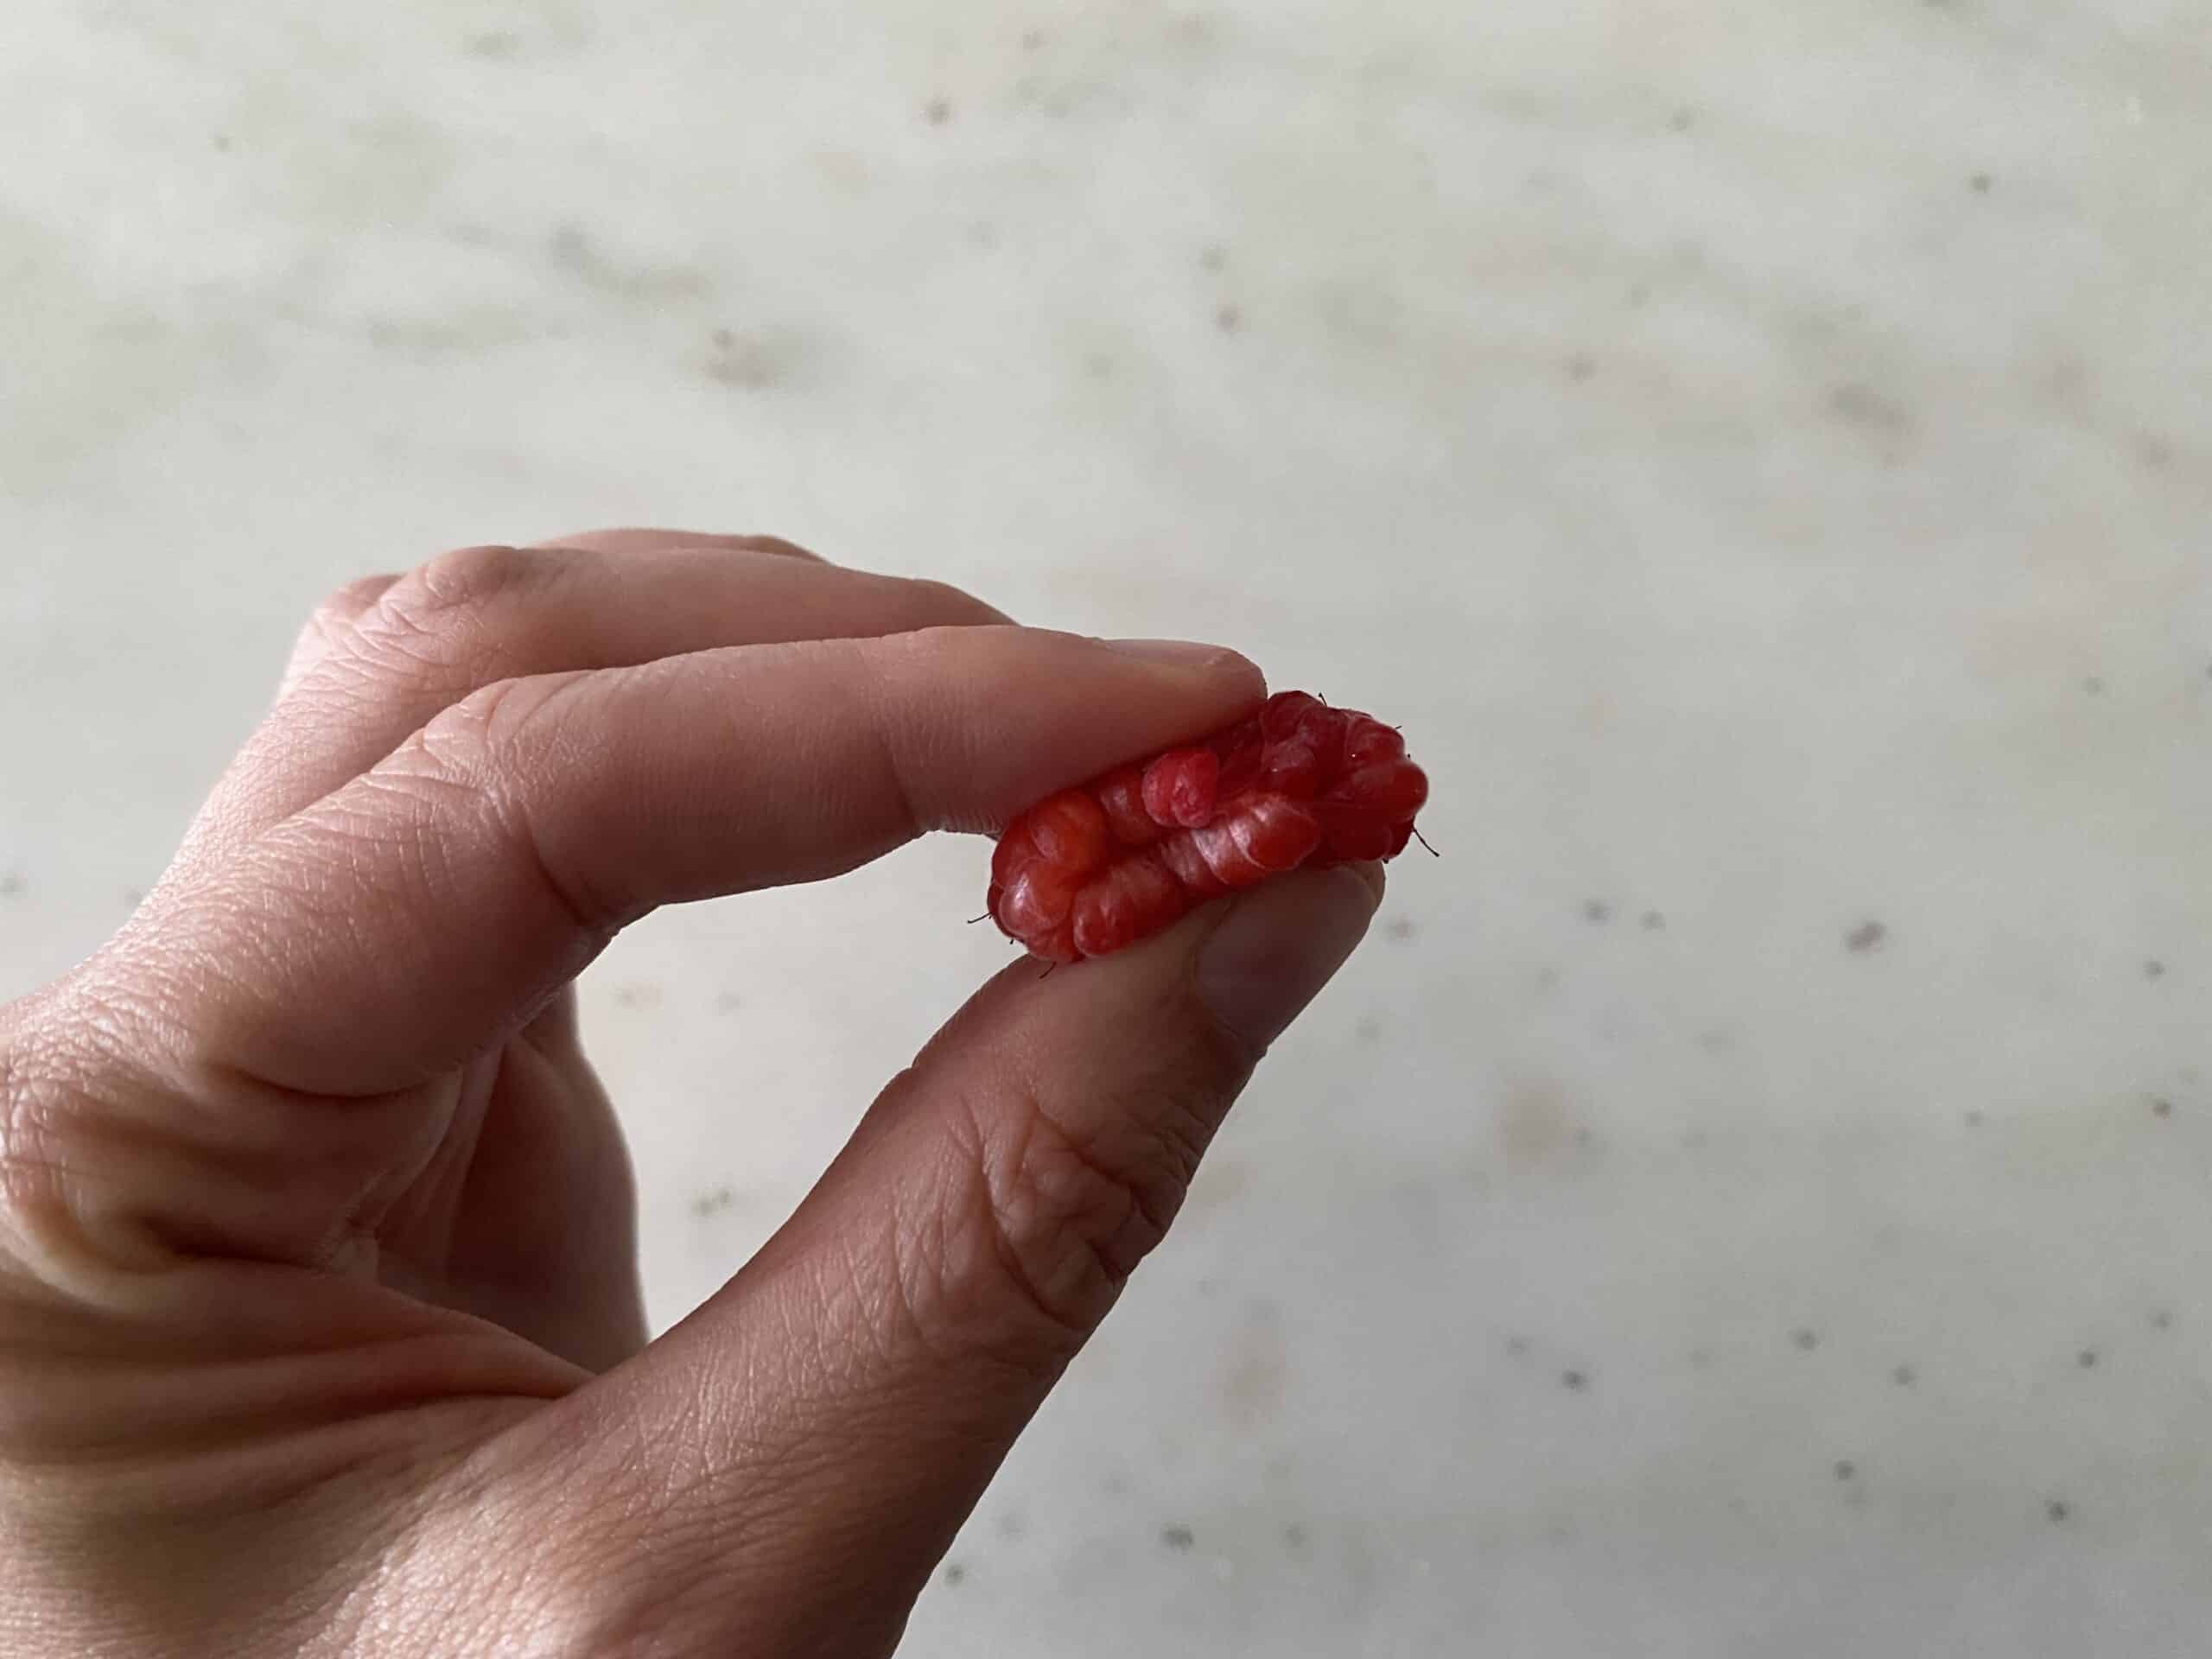 a raspberry being pressed between thumb and forefinger for babies 6 months+